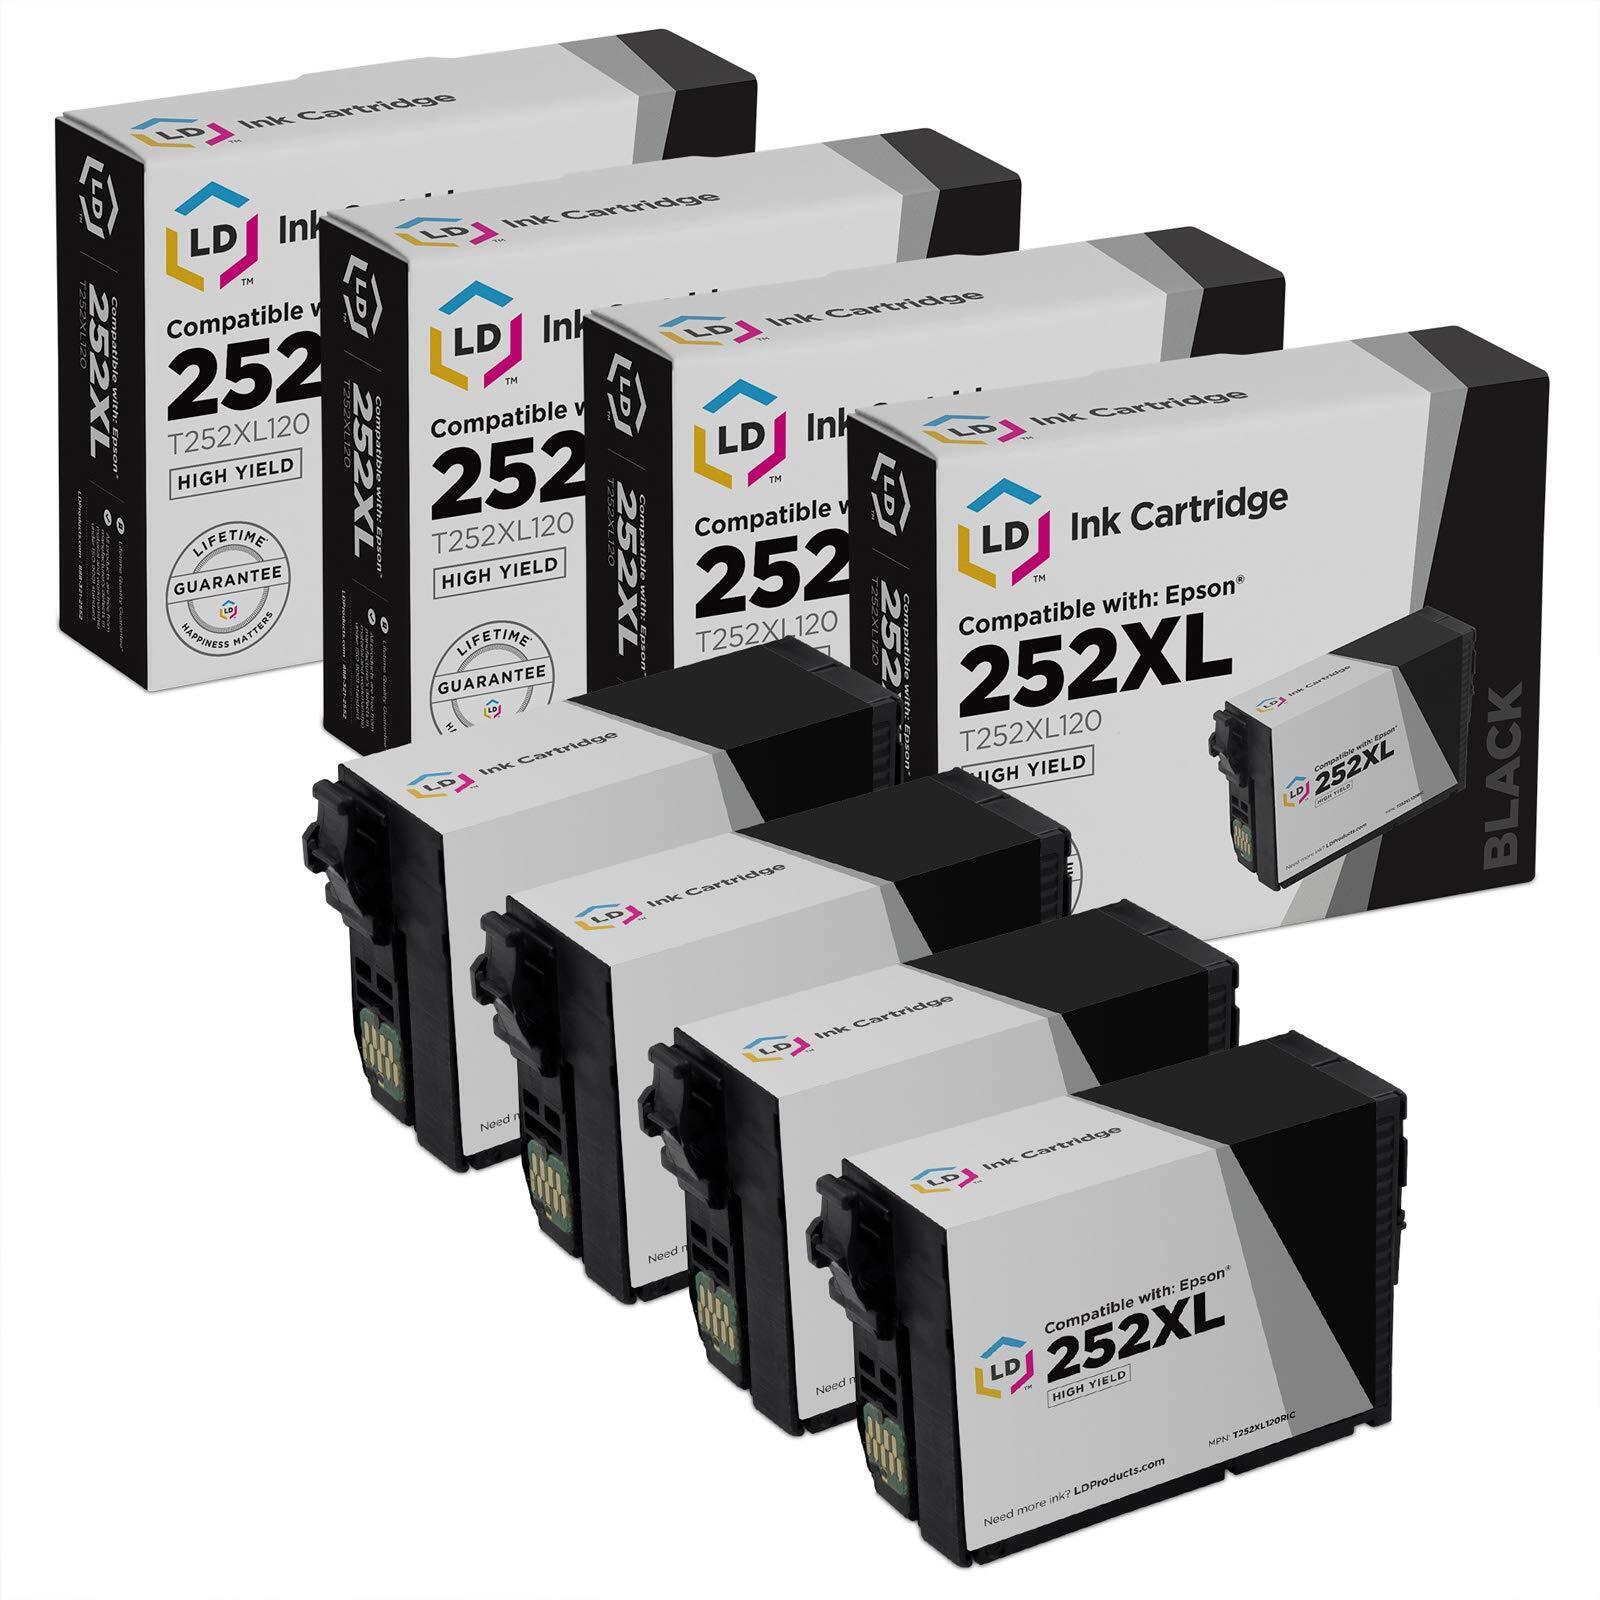 LD Products Replacements for Epson 252XL Black Ink Cartridge (4-Pack) High Yield